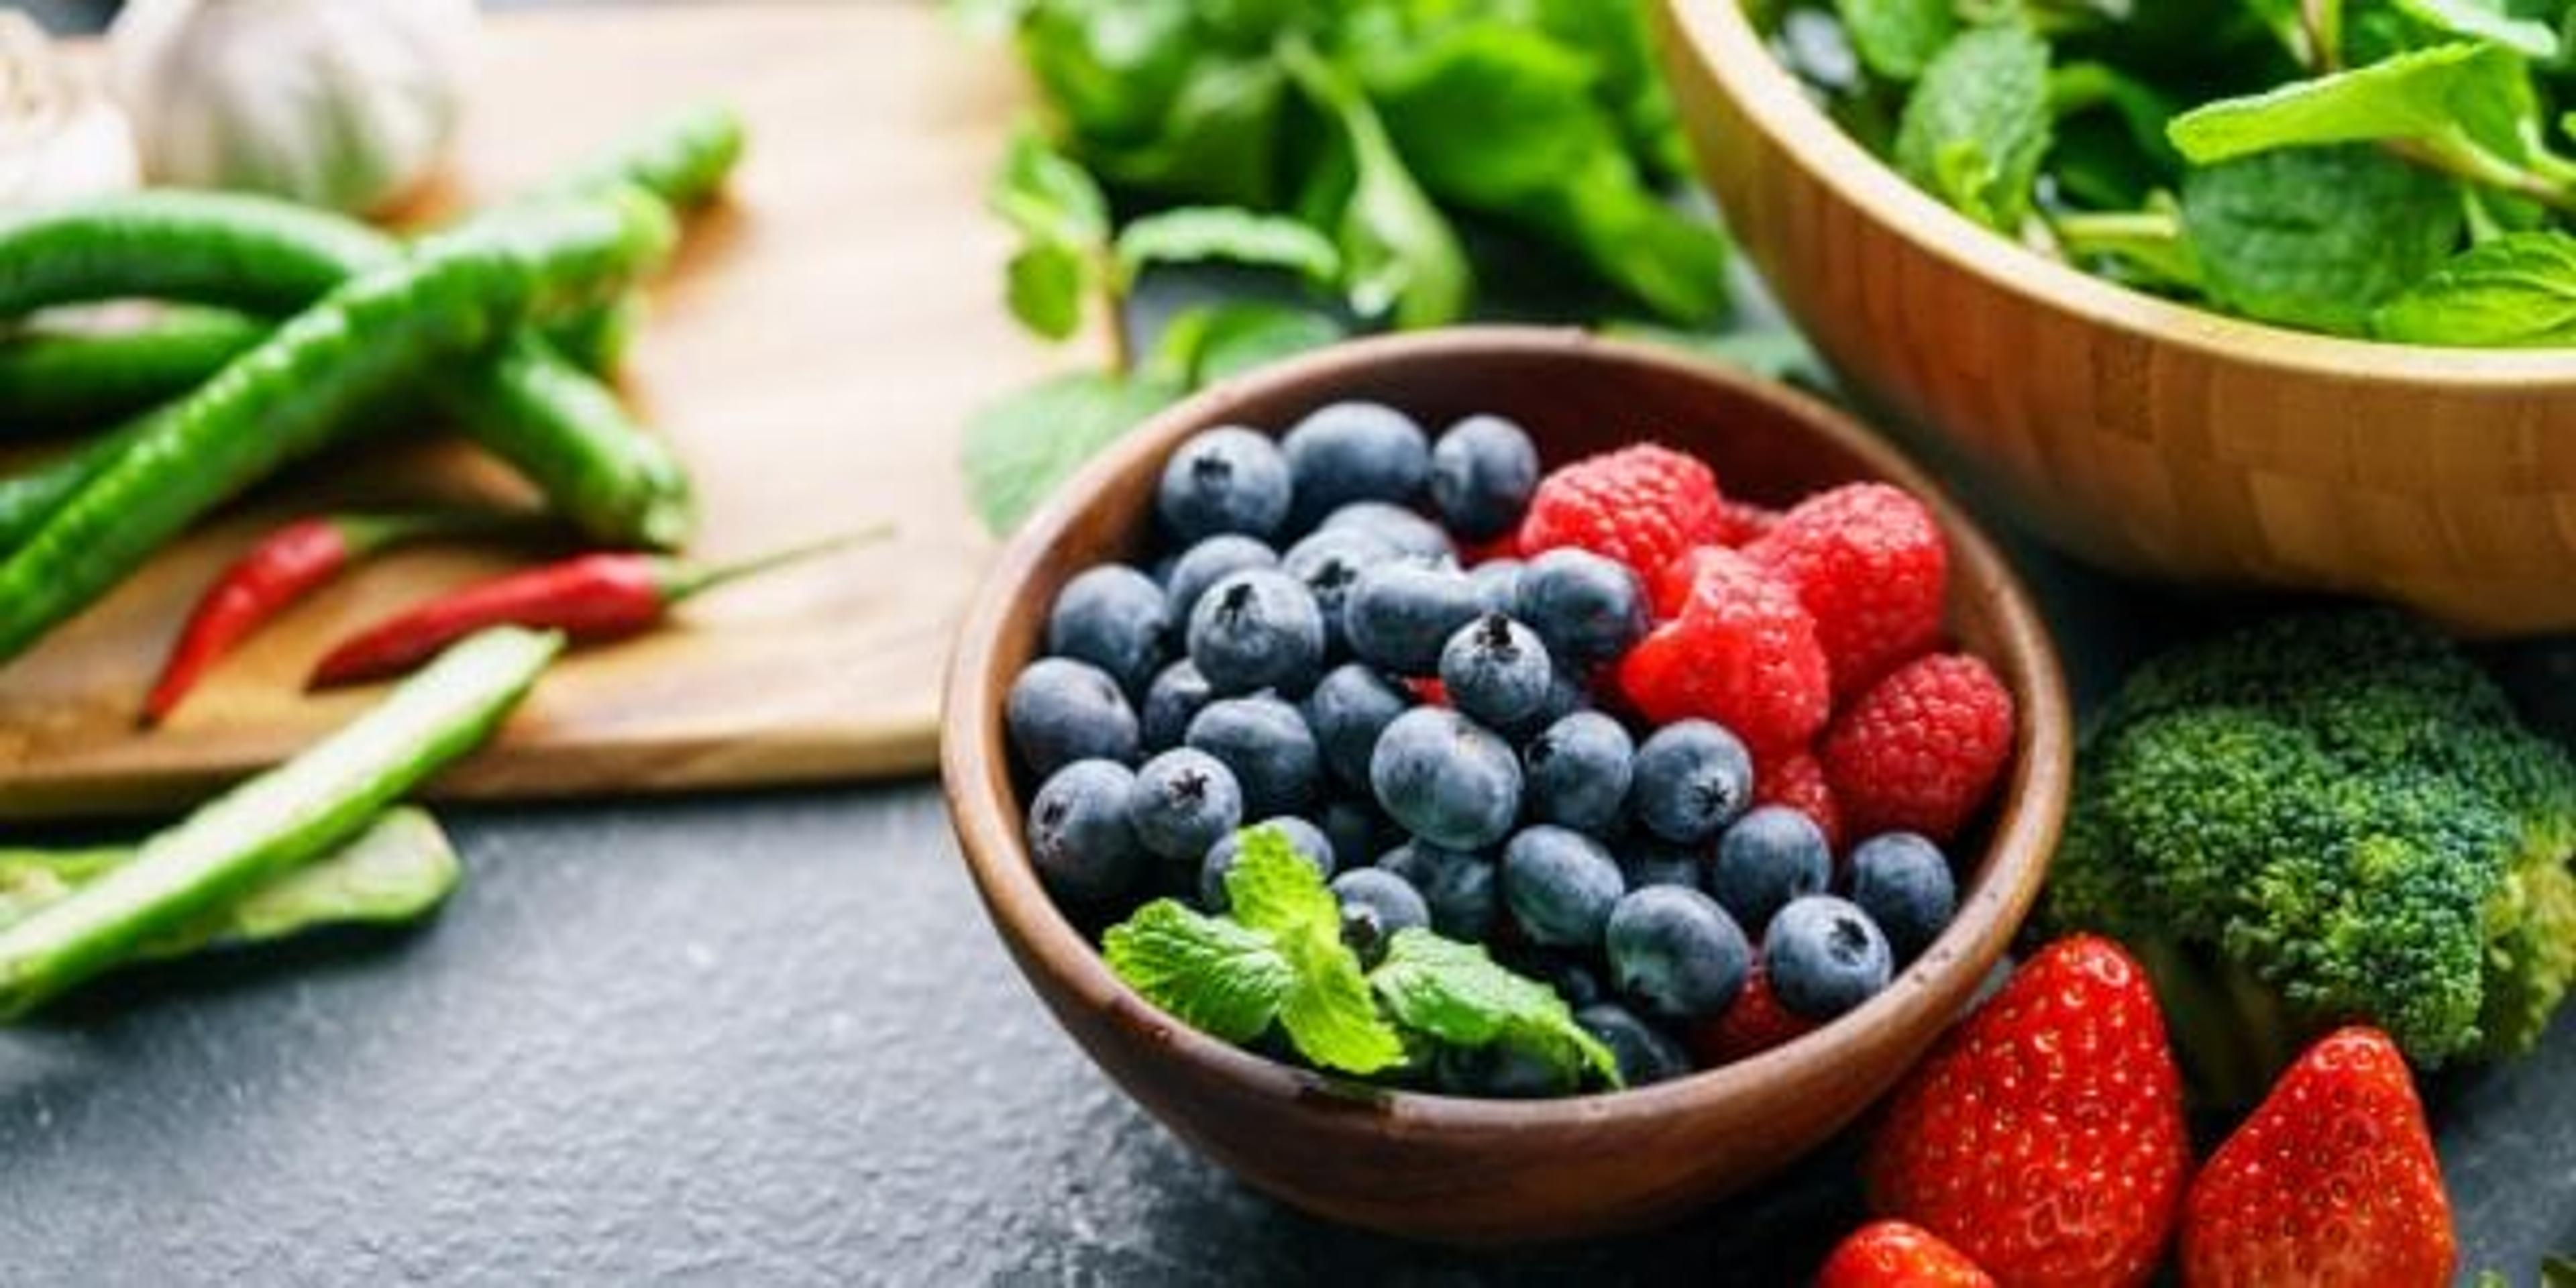 Antioxidant-rich berries surrounded by leafy greens and other veggies